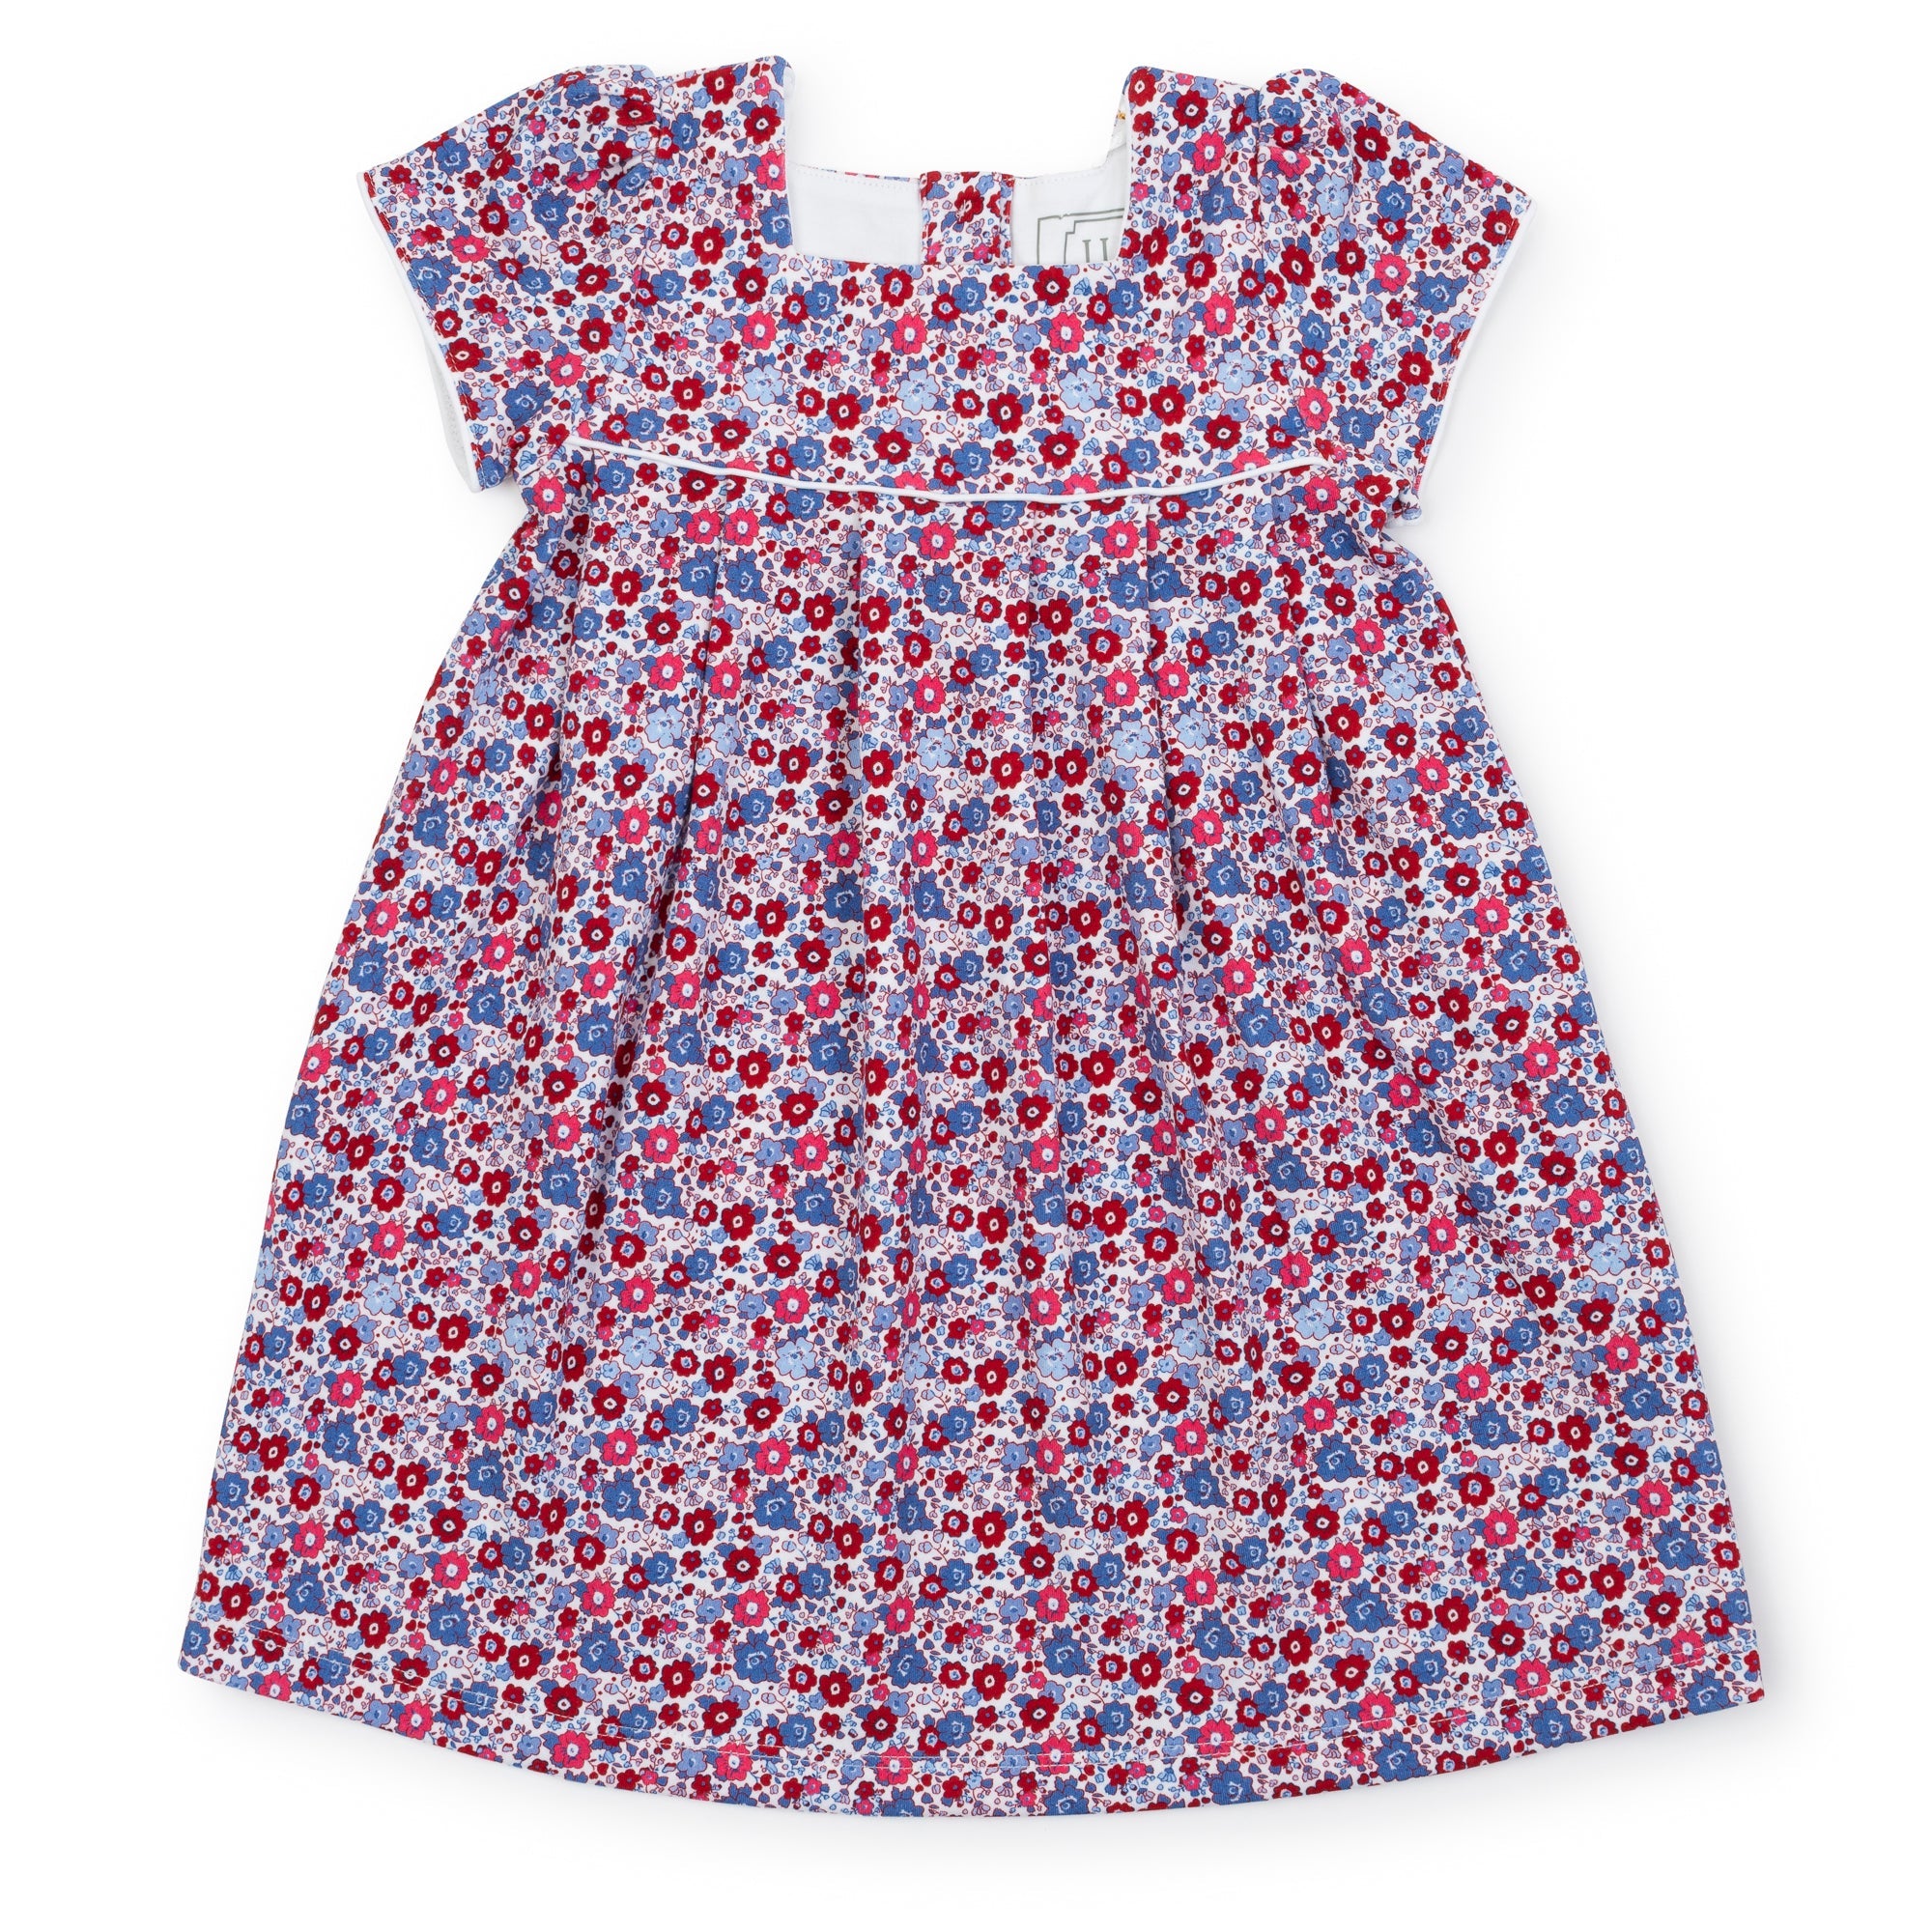 Lizzy Girls' Woven Pima Cotton Dress - Freedom Floral